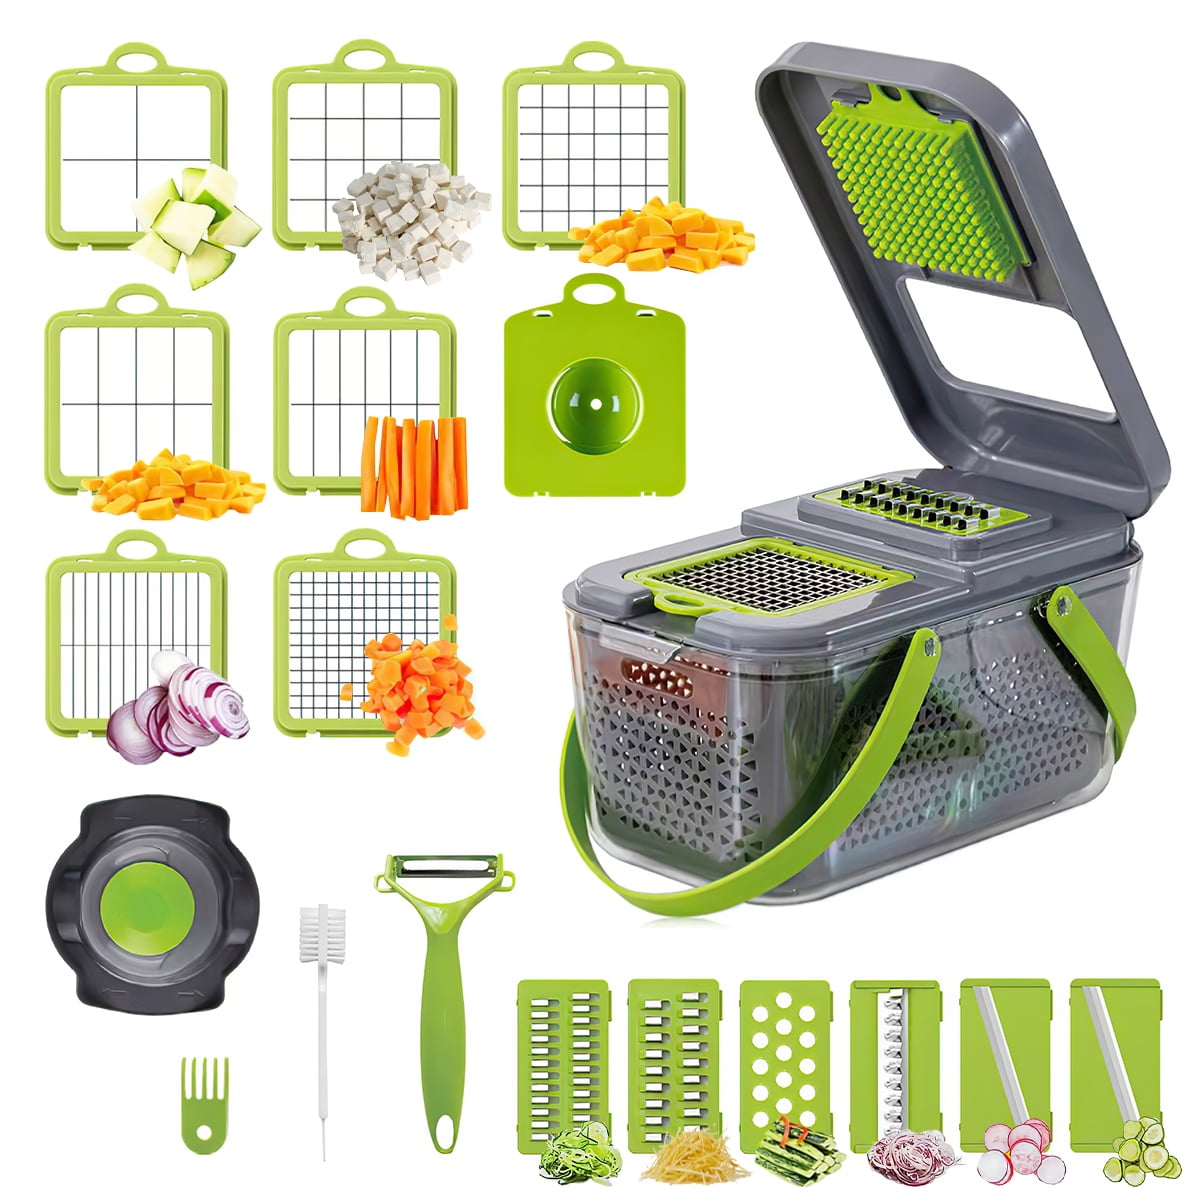 MegaChef 8-in-1 Multi-Use Slicer Dicer and Chopper